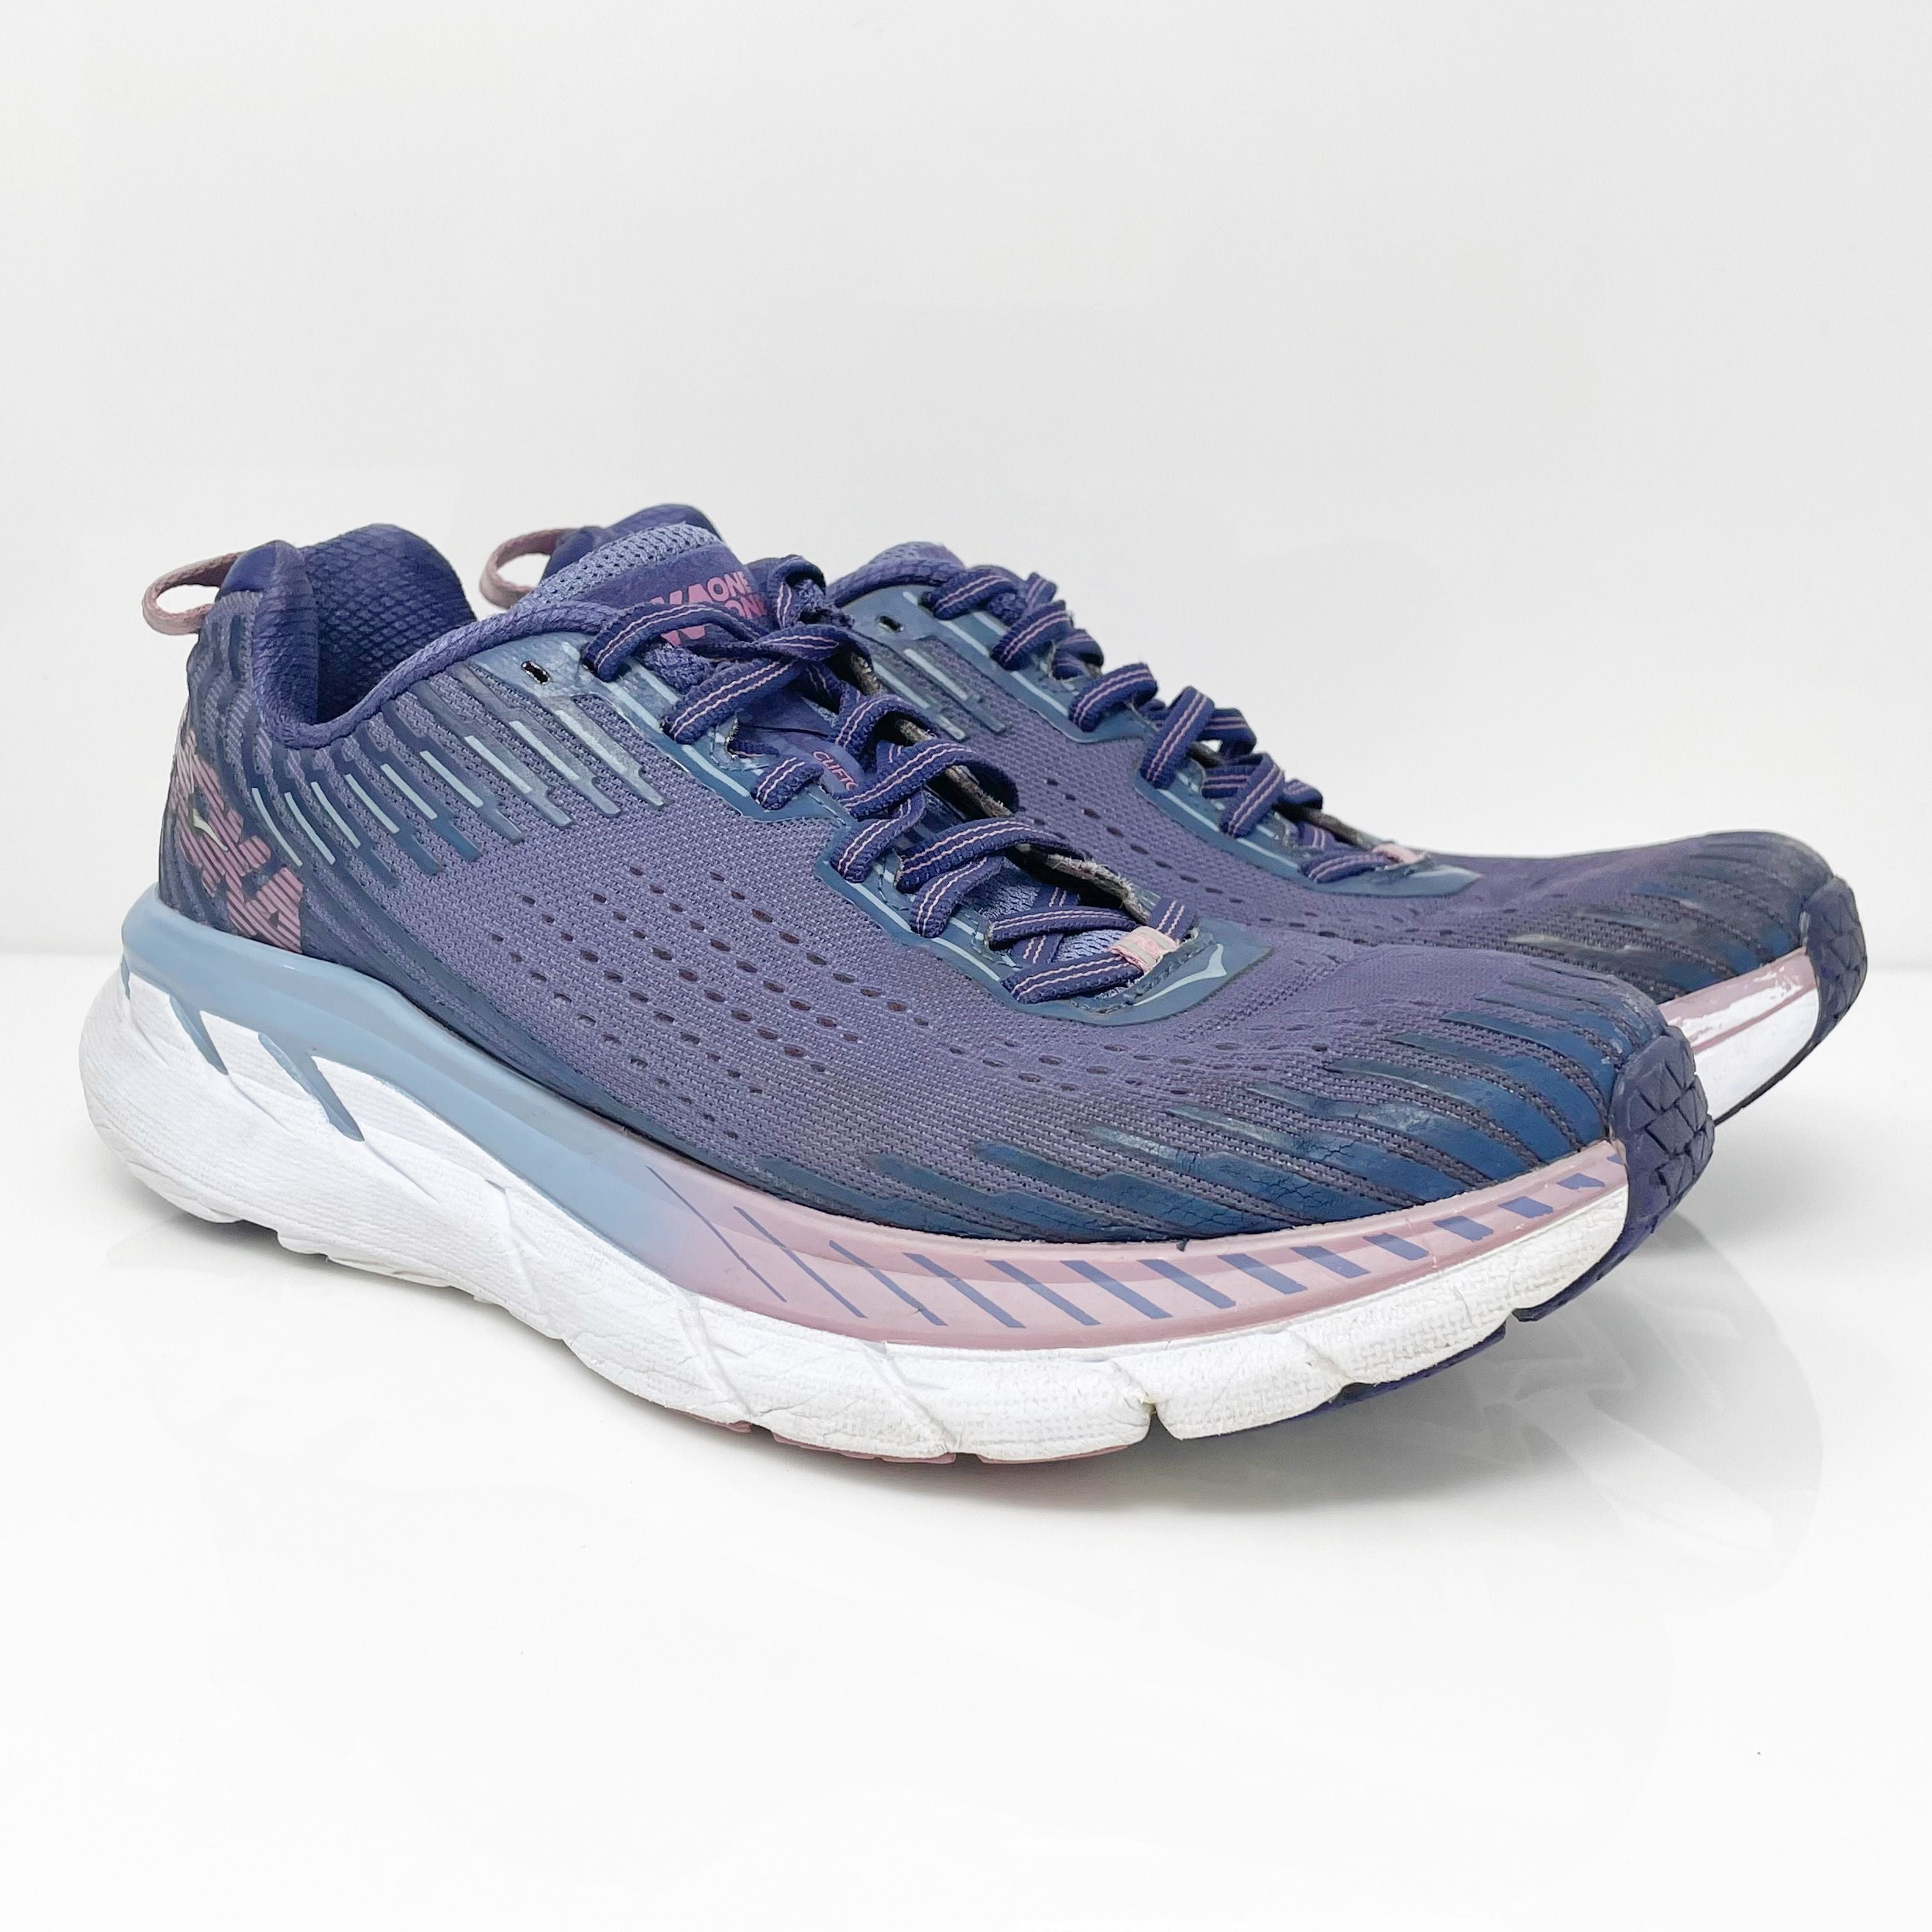 Hoka One One Womens Clifton 5 1093756 MBRB Blue Running Shoes Sneakers ...